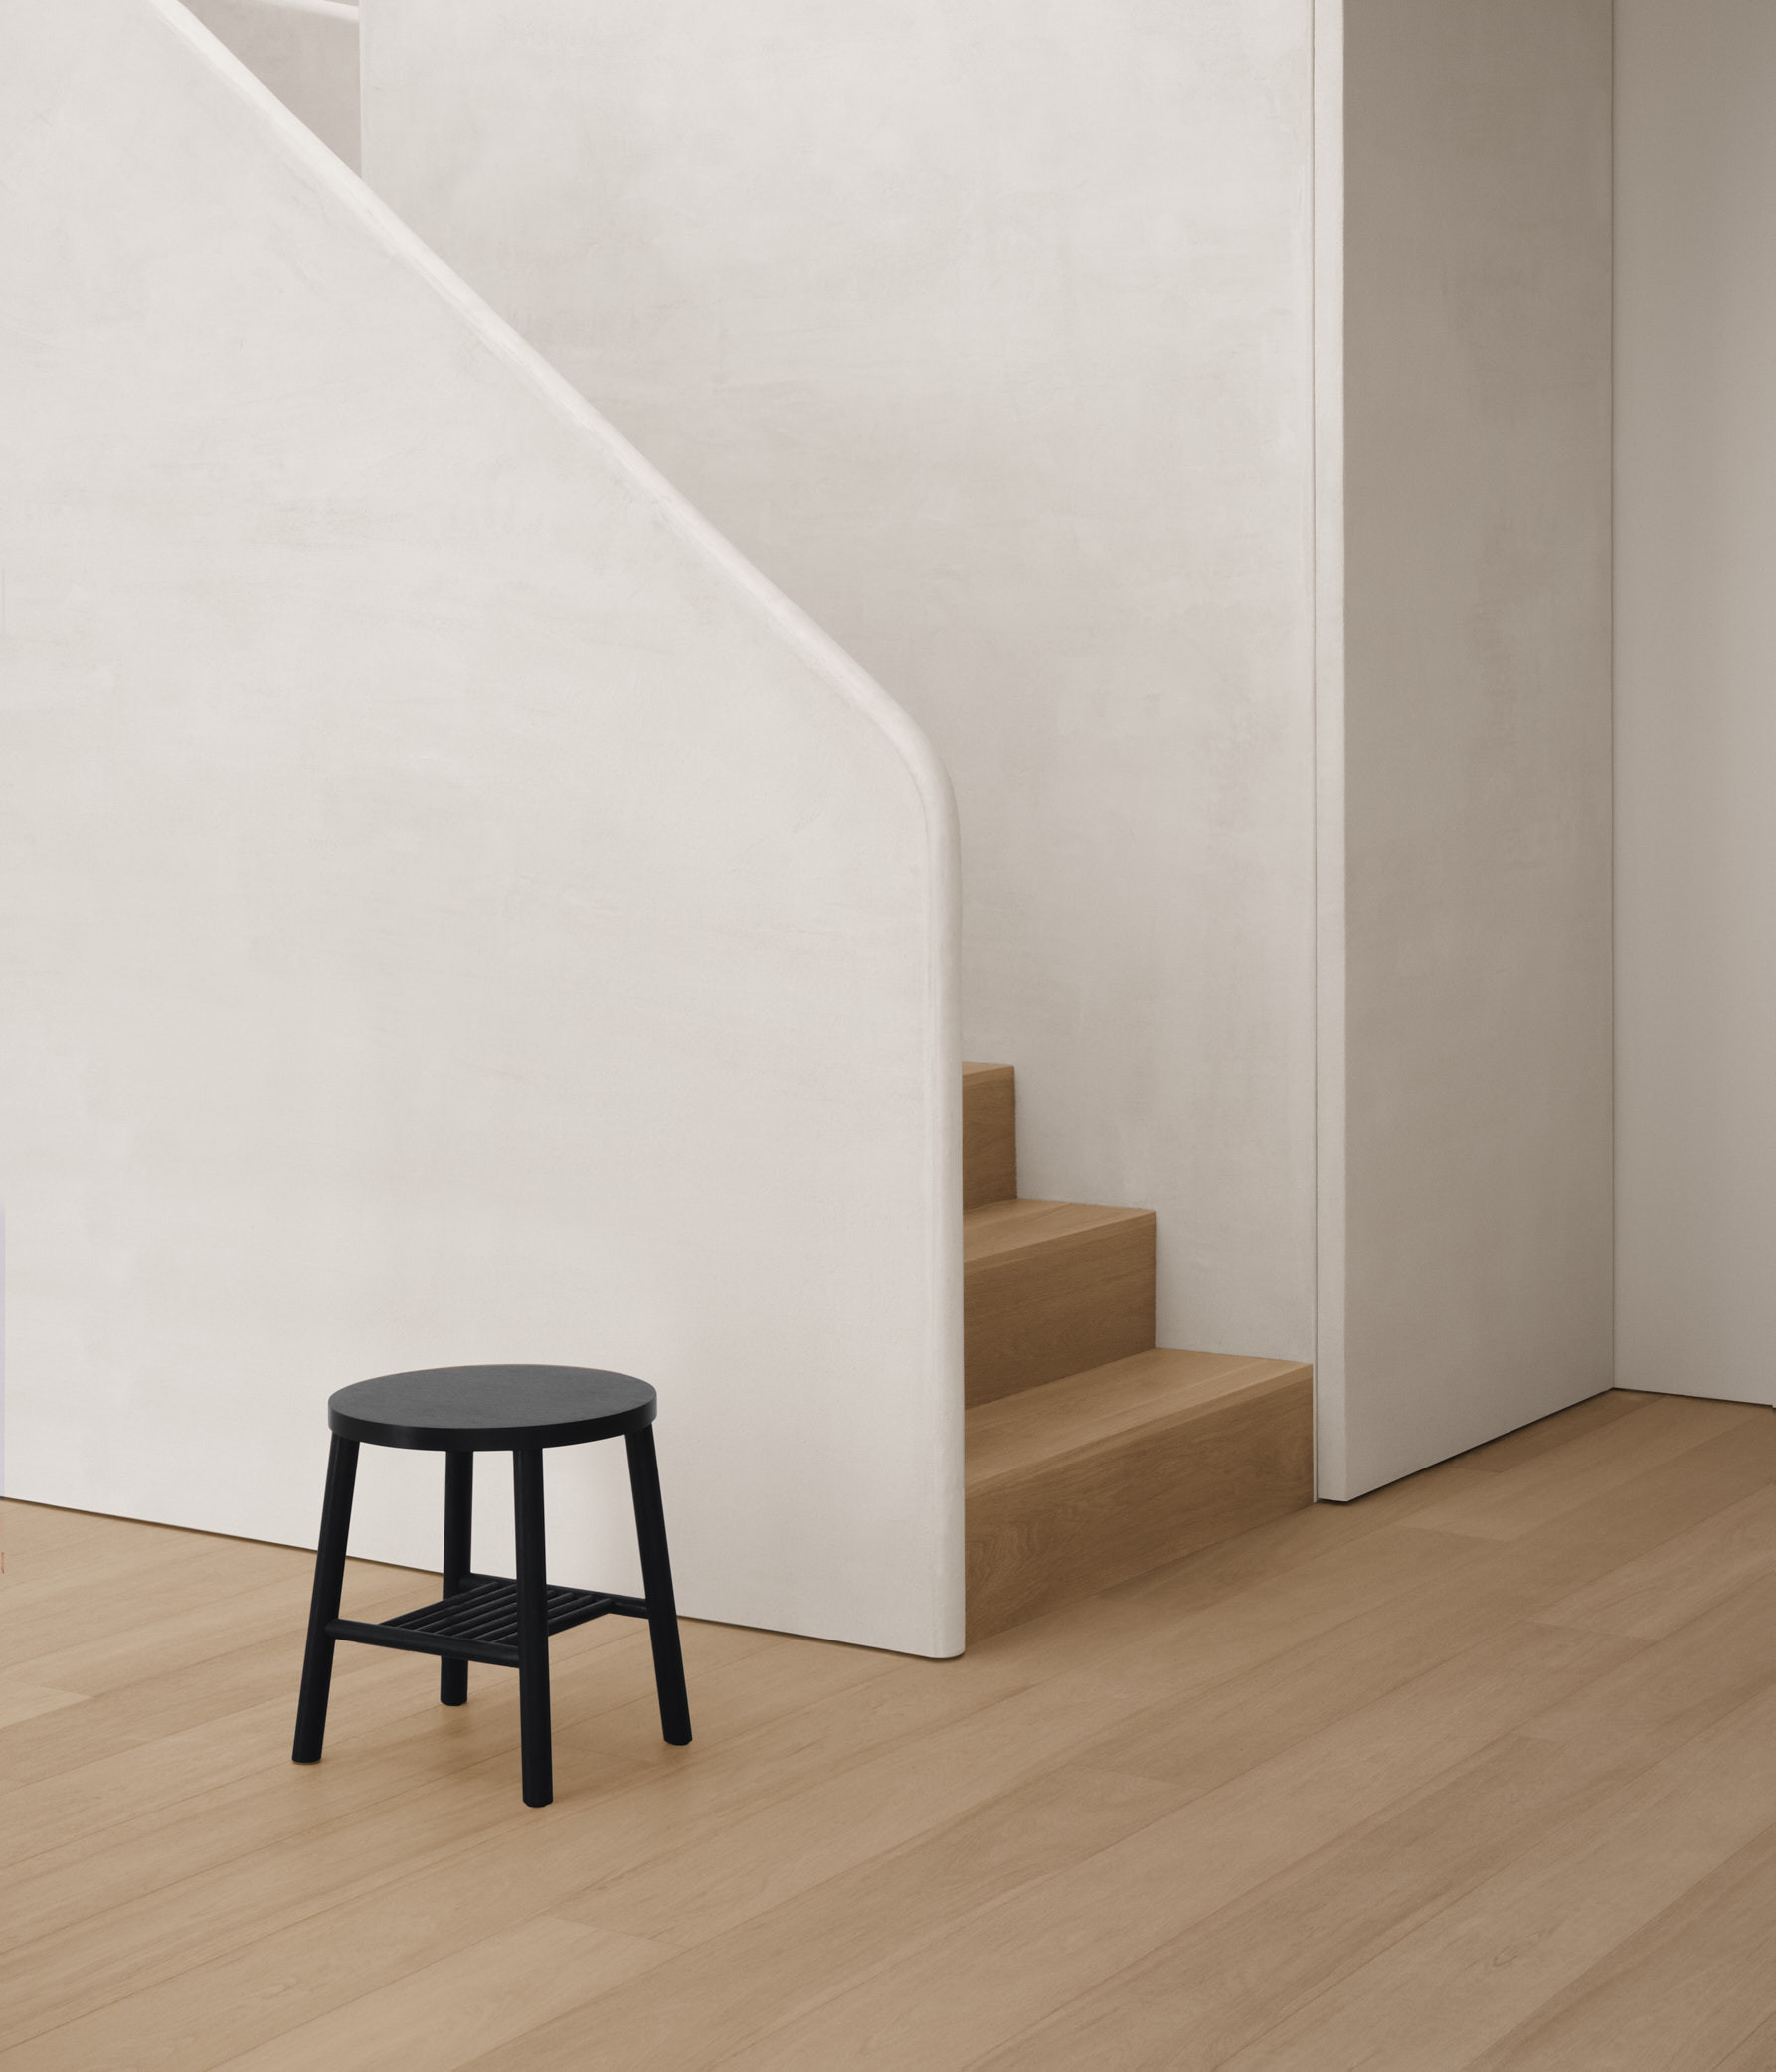 black stool against textured stair case